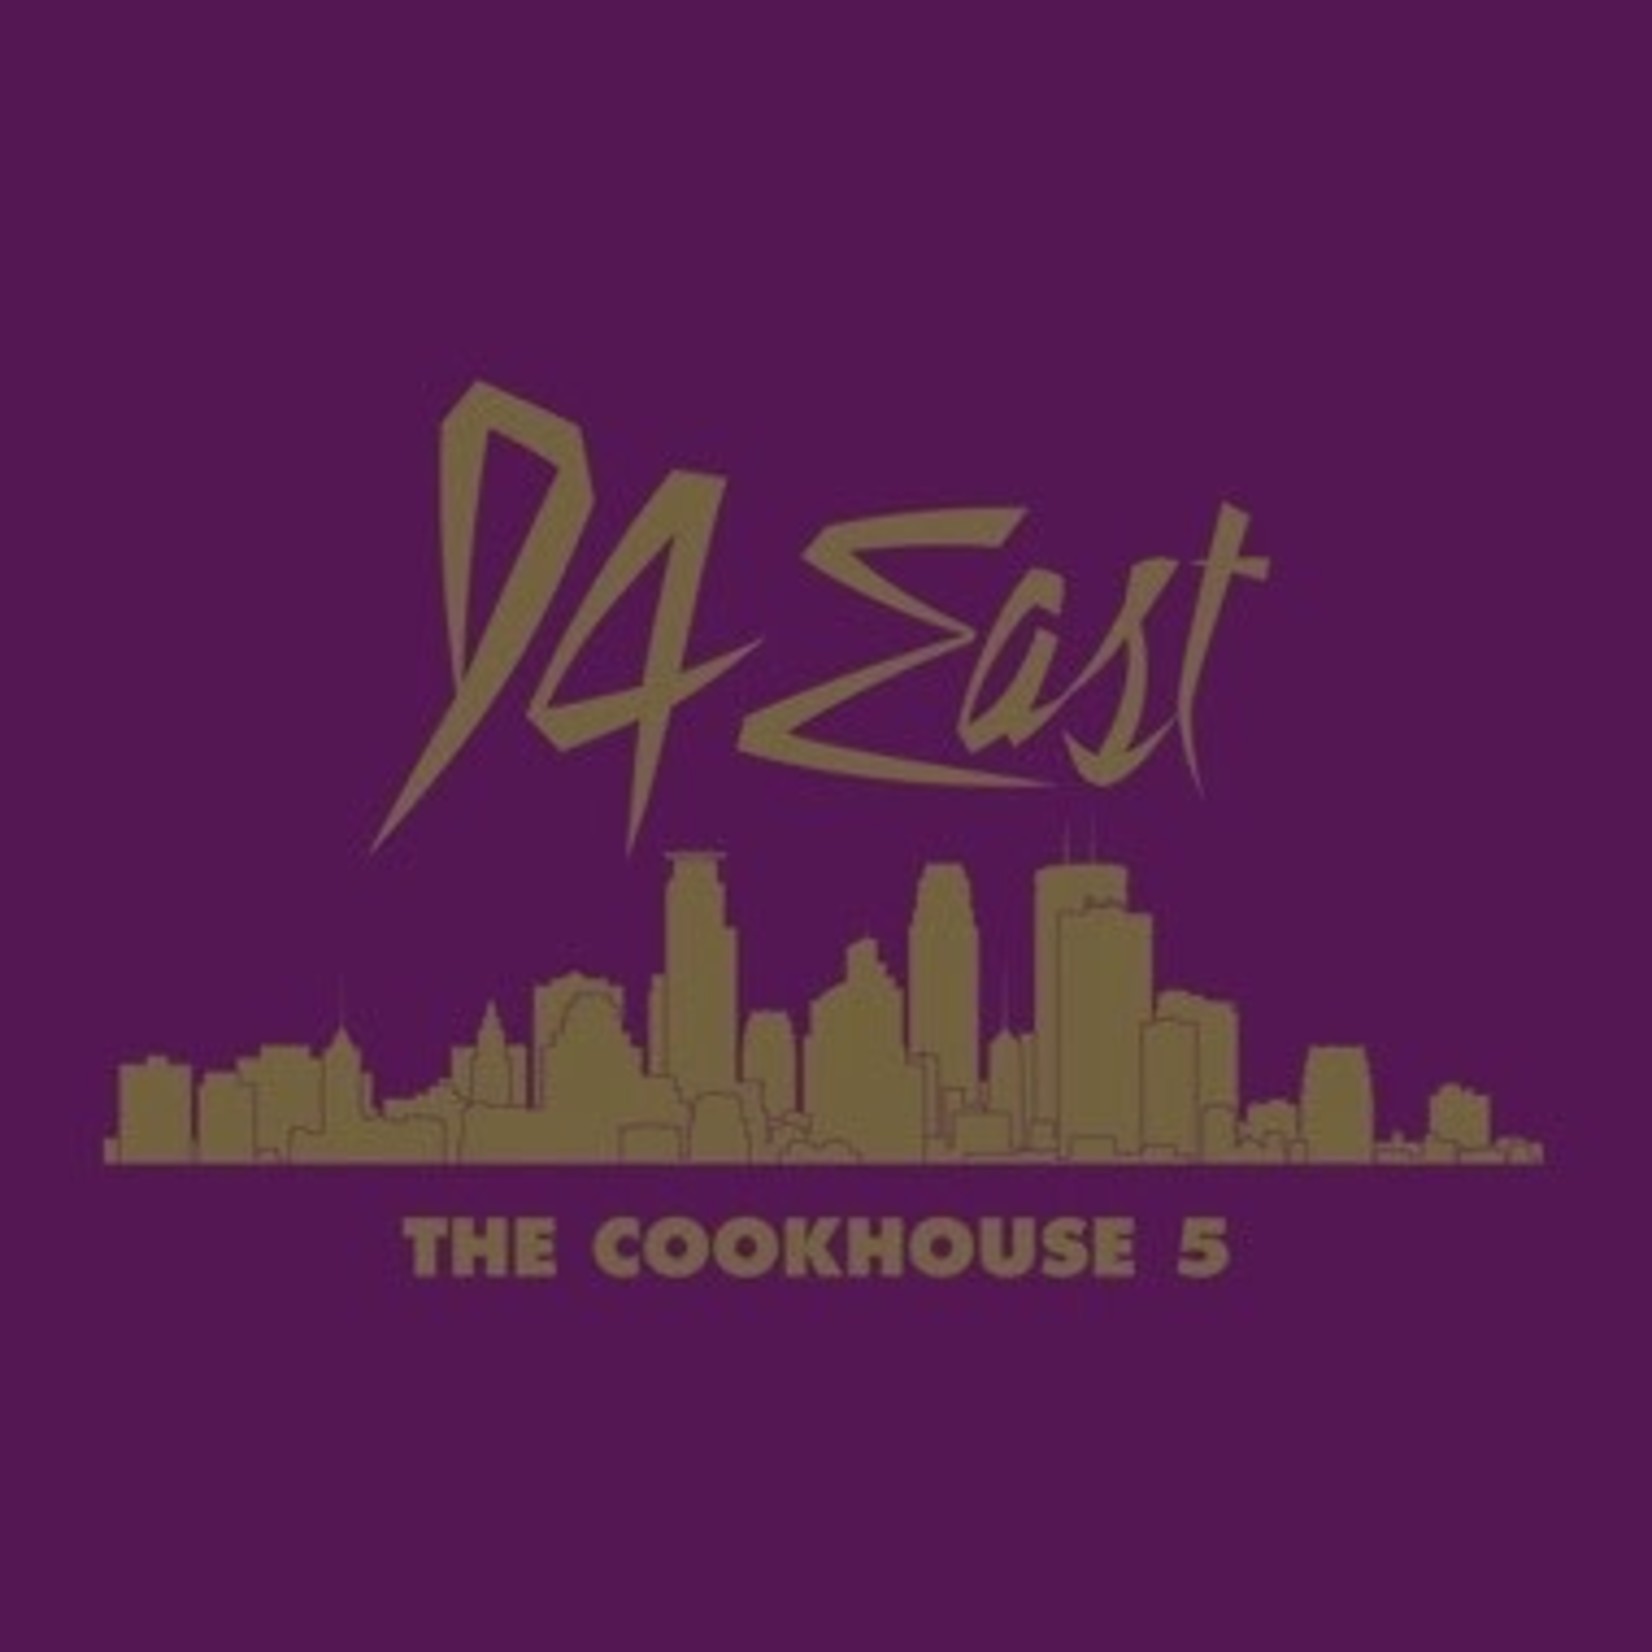 Numero Group 94 East - The Cookhouse 5 (LP) [Gold]